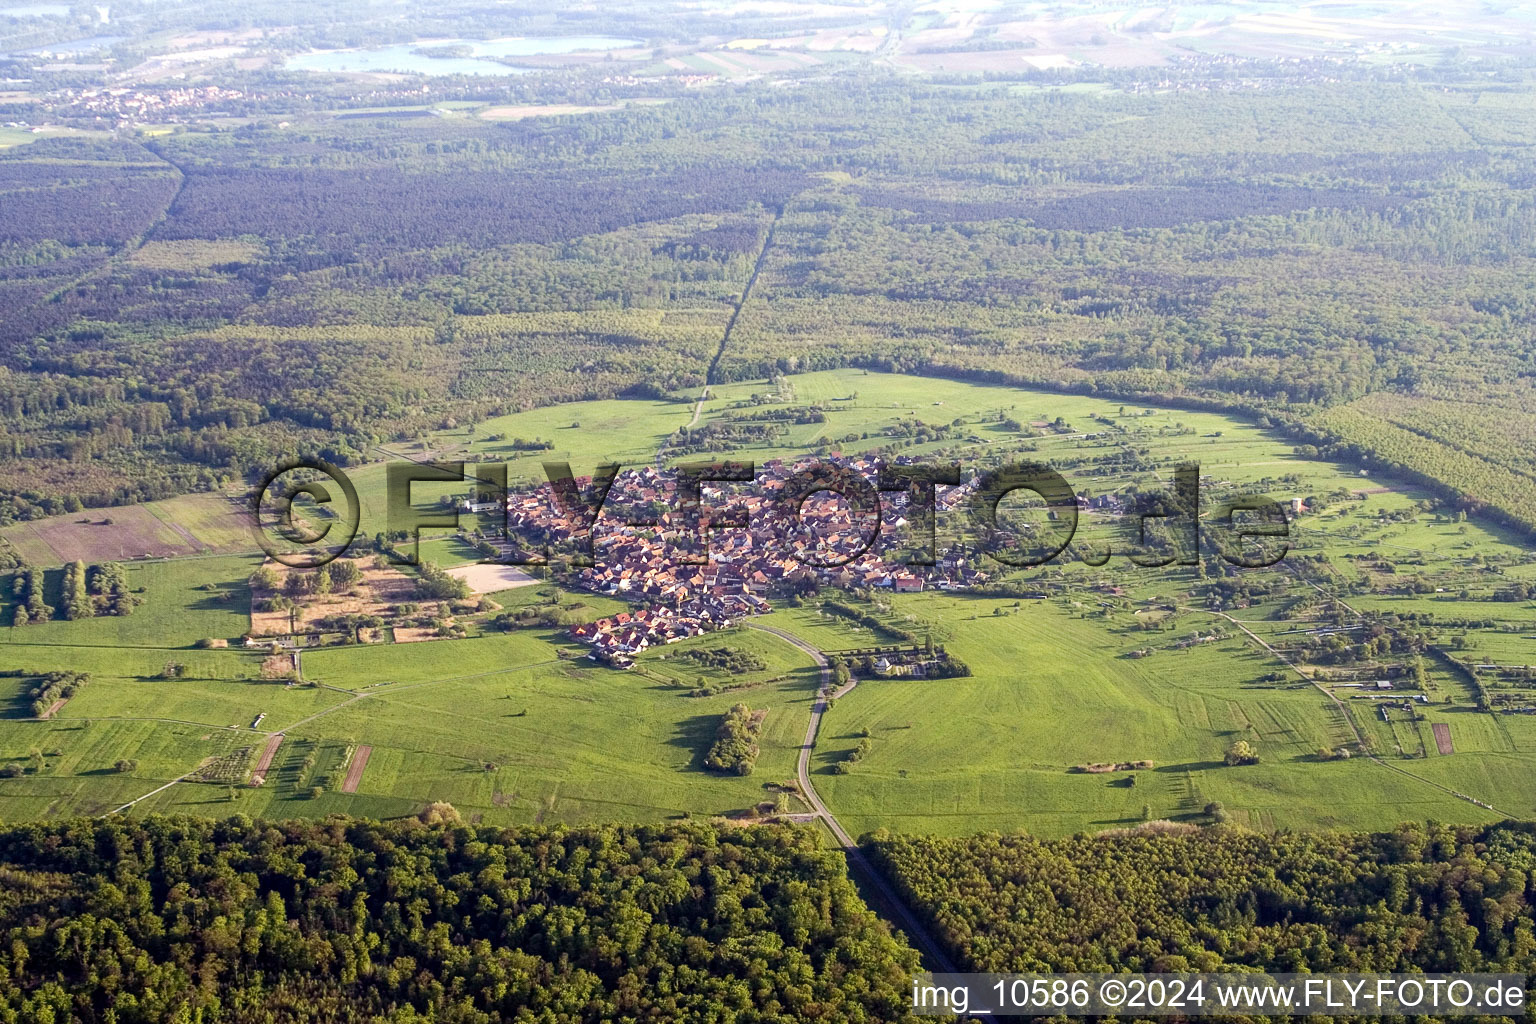 Village - view on the edge of agricultural fields and farmland in the district Buechelberg in Woerth am Rhein in the state Rhineland-Palatinate